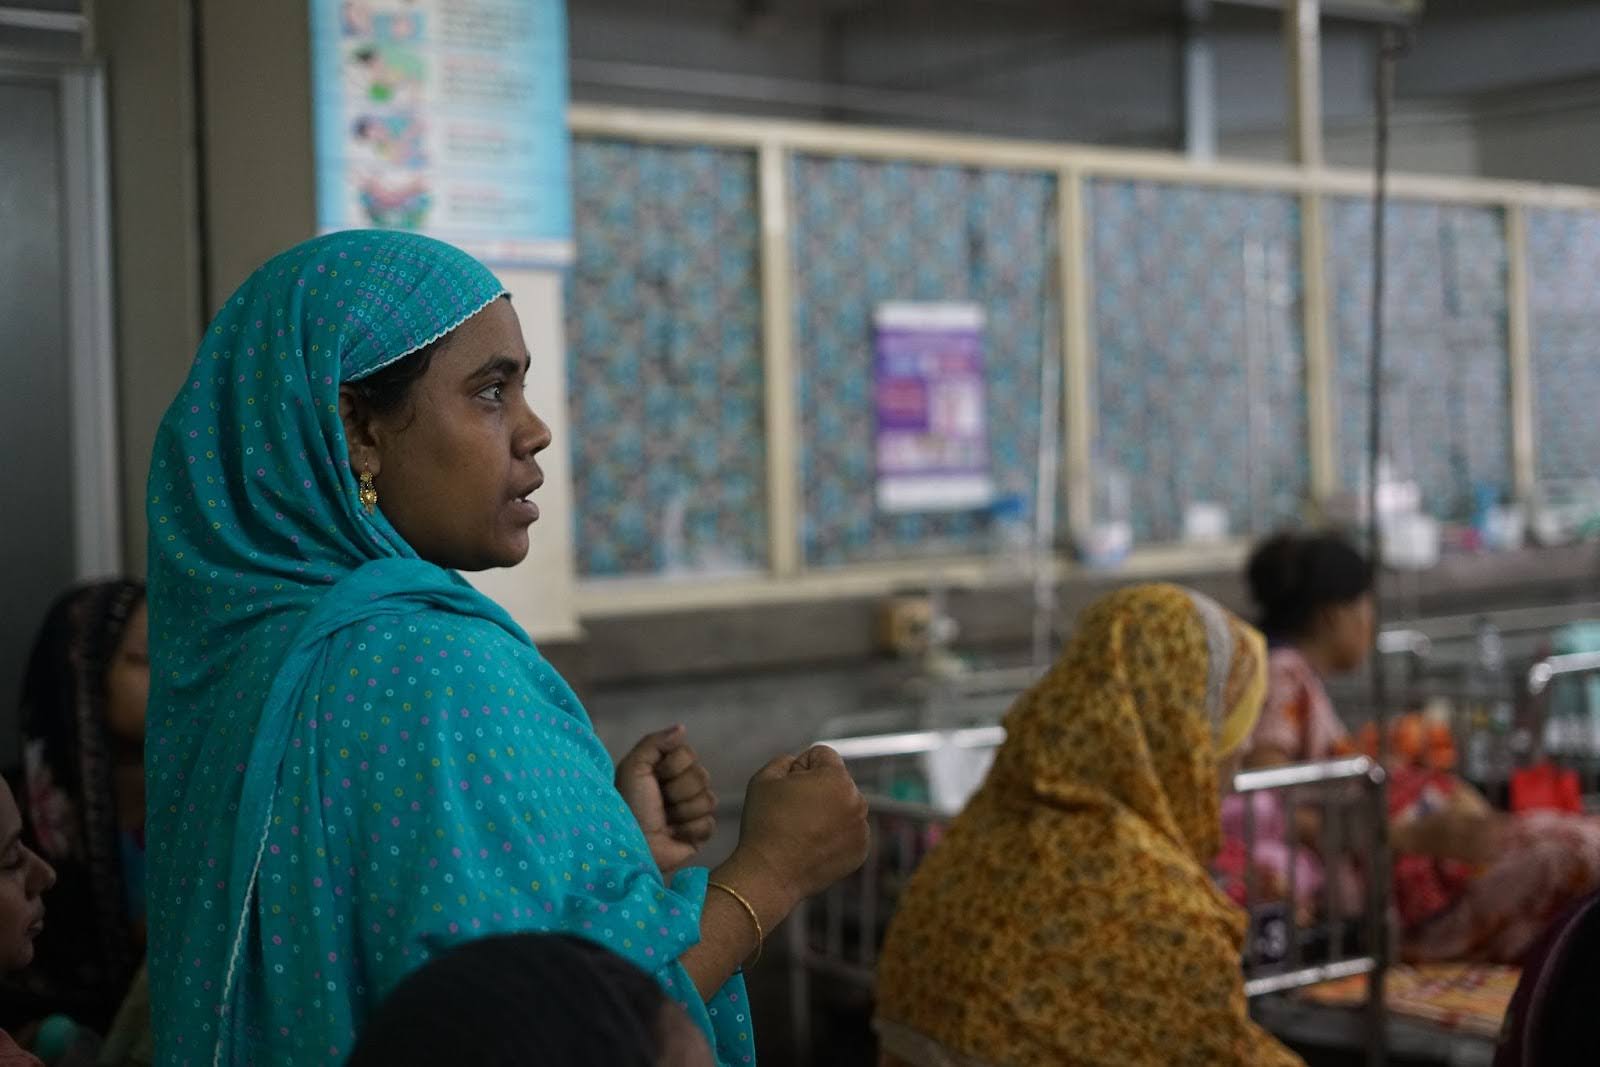 Sabina is in a ward responding to a question during a Care Companion Program session at Dhaka Shishu (Children’s) Hospital.